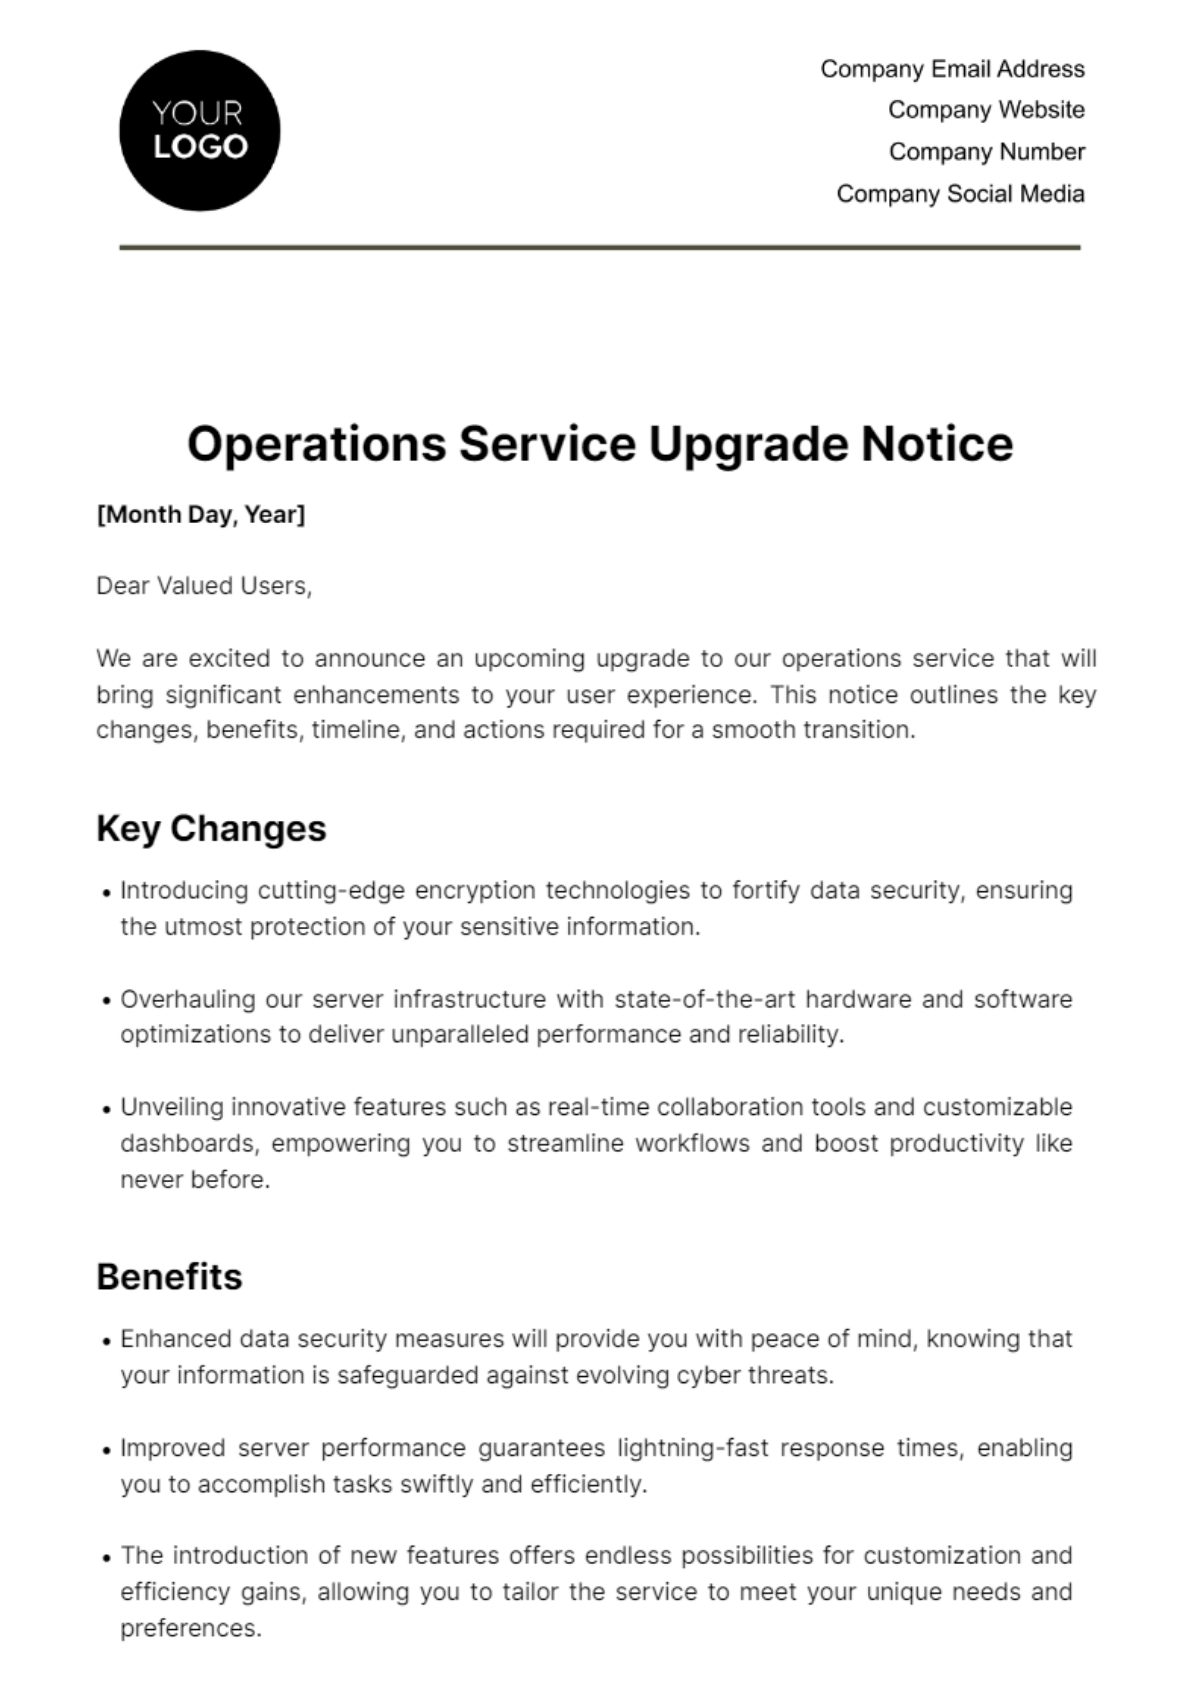 Free Operations Service Upgrade Notice Template